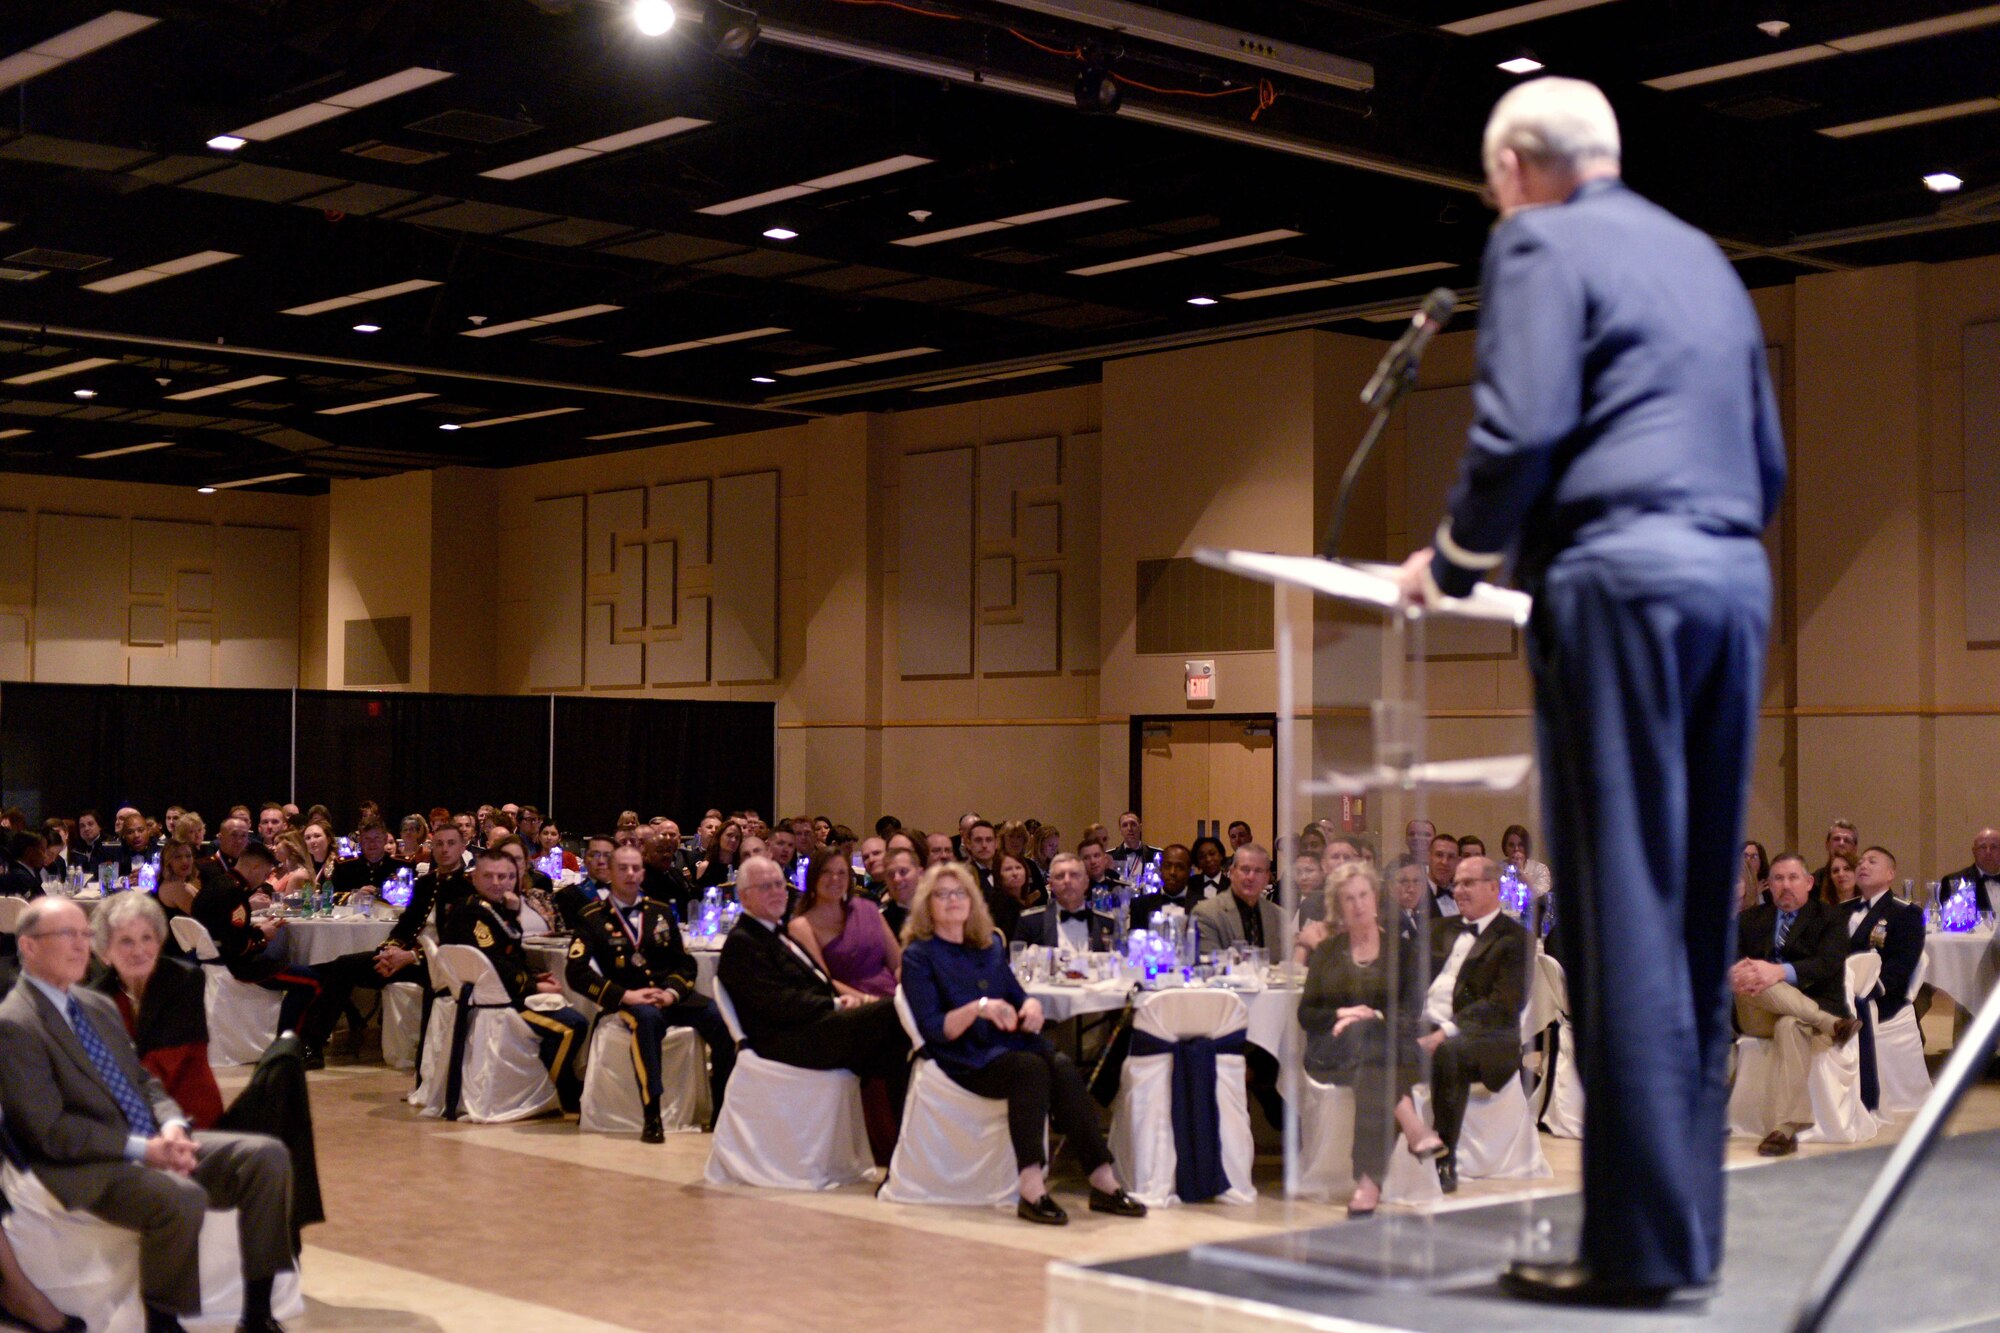 U.S. Air Force retired Lt. Gen. Joe Wherle speaks during the 25th Annual Awards Ceremony at the McNeese Convention Center in San Angelo, Texas, Feb. 9, 2018. Wherle attended the ceremony as a guest speaker and to congratulate the award winners. (U.S. Air Force photo by Senior Airman Randall Moose)